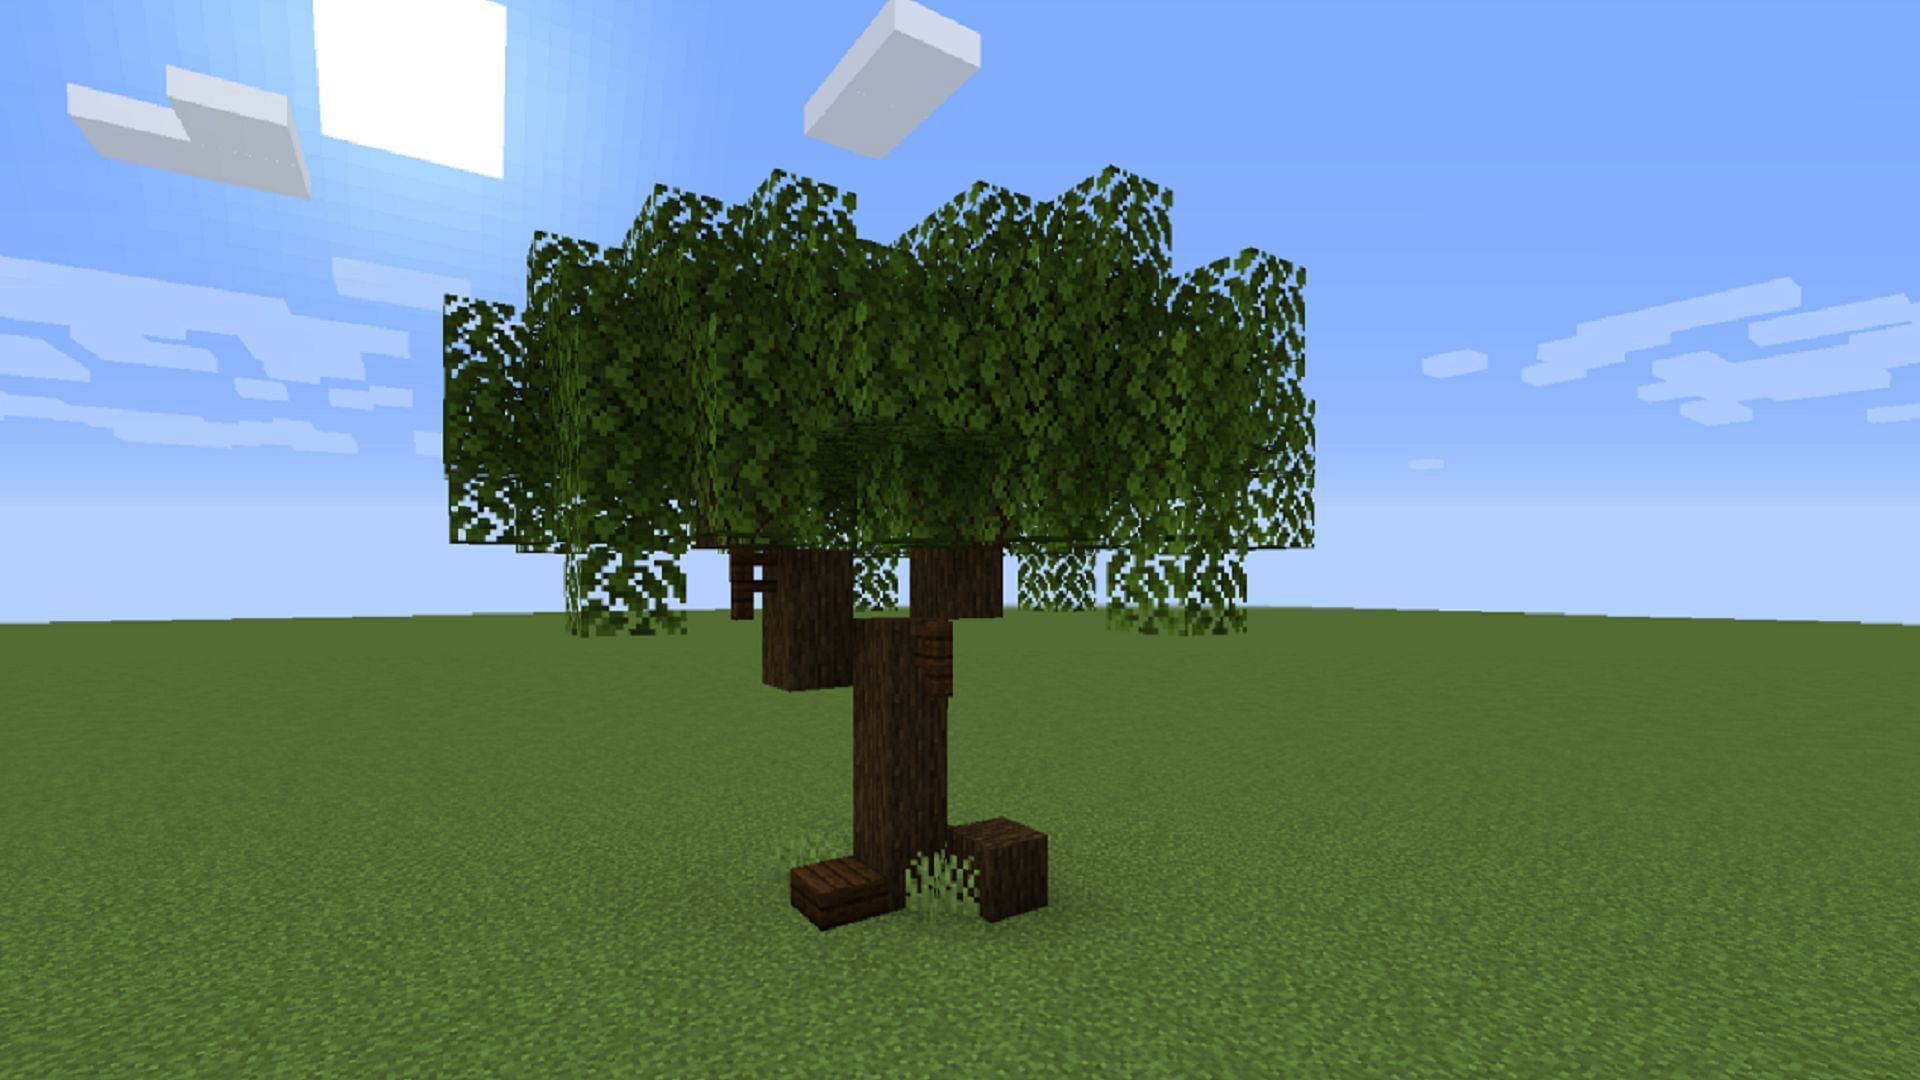 Custom tree designs can be a fun project for a new player in Minecraft (Image via Minecraft Build Inspiration/tumblr)